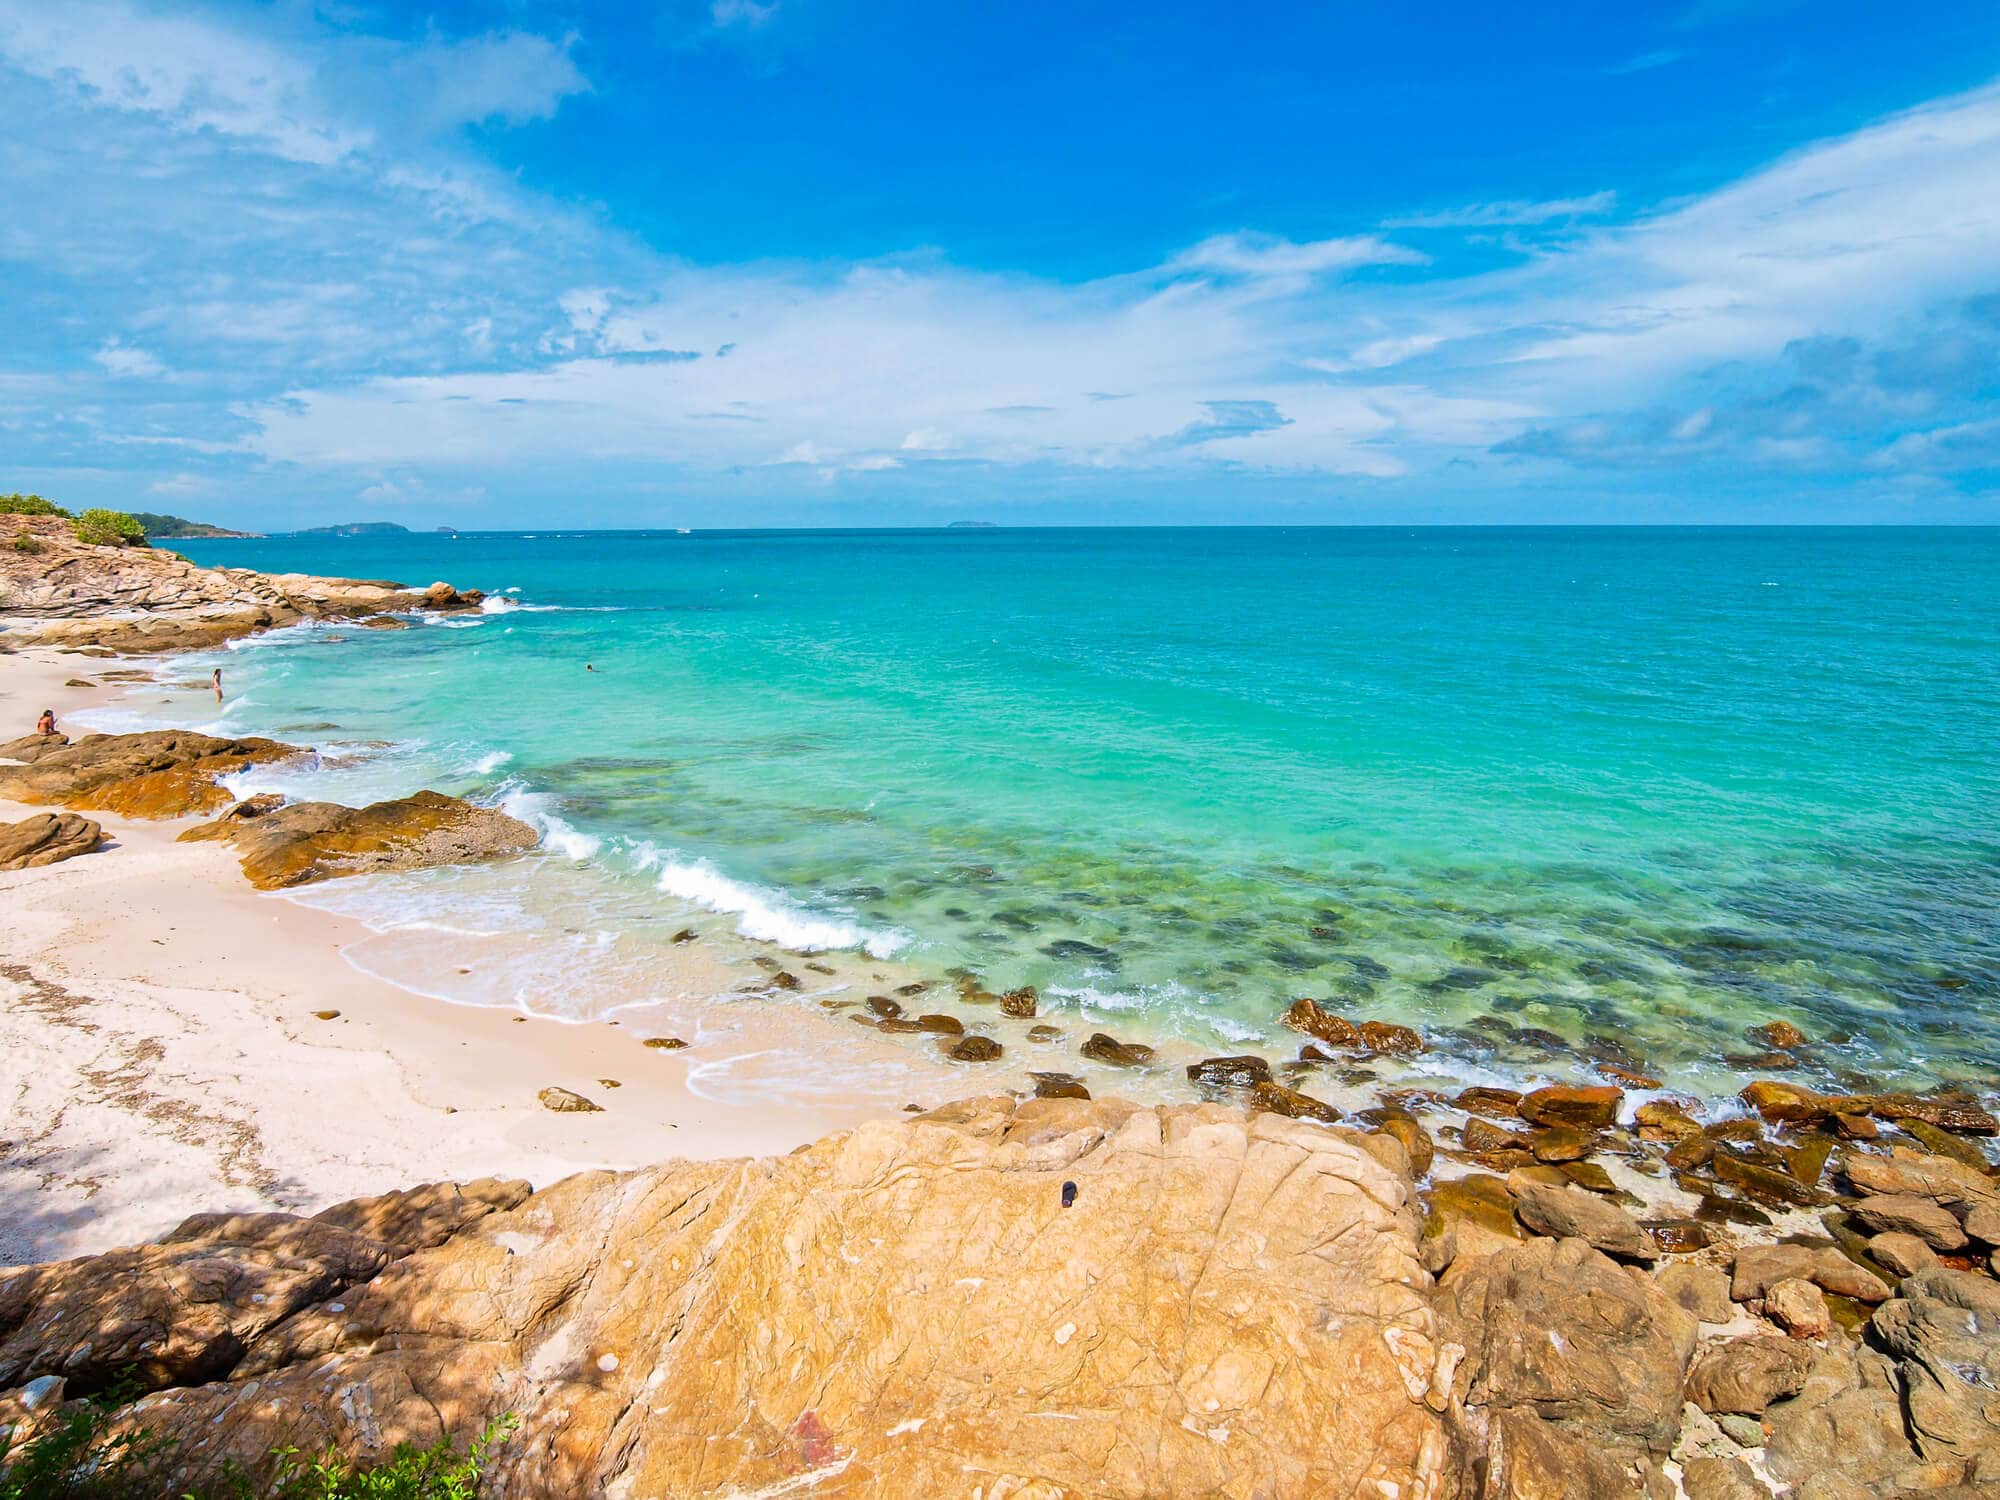 View of the small and rocky Ao Nuan Beach on Koh Samet.